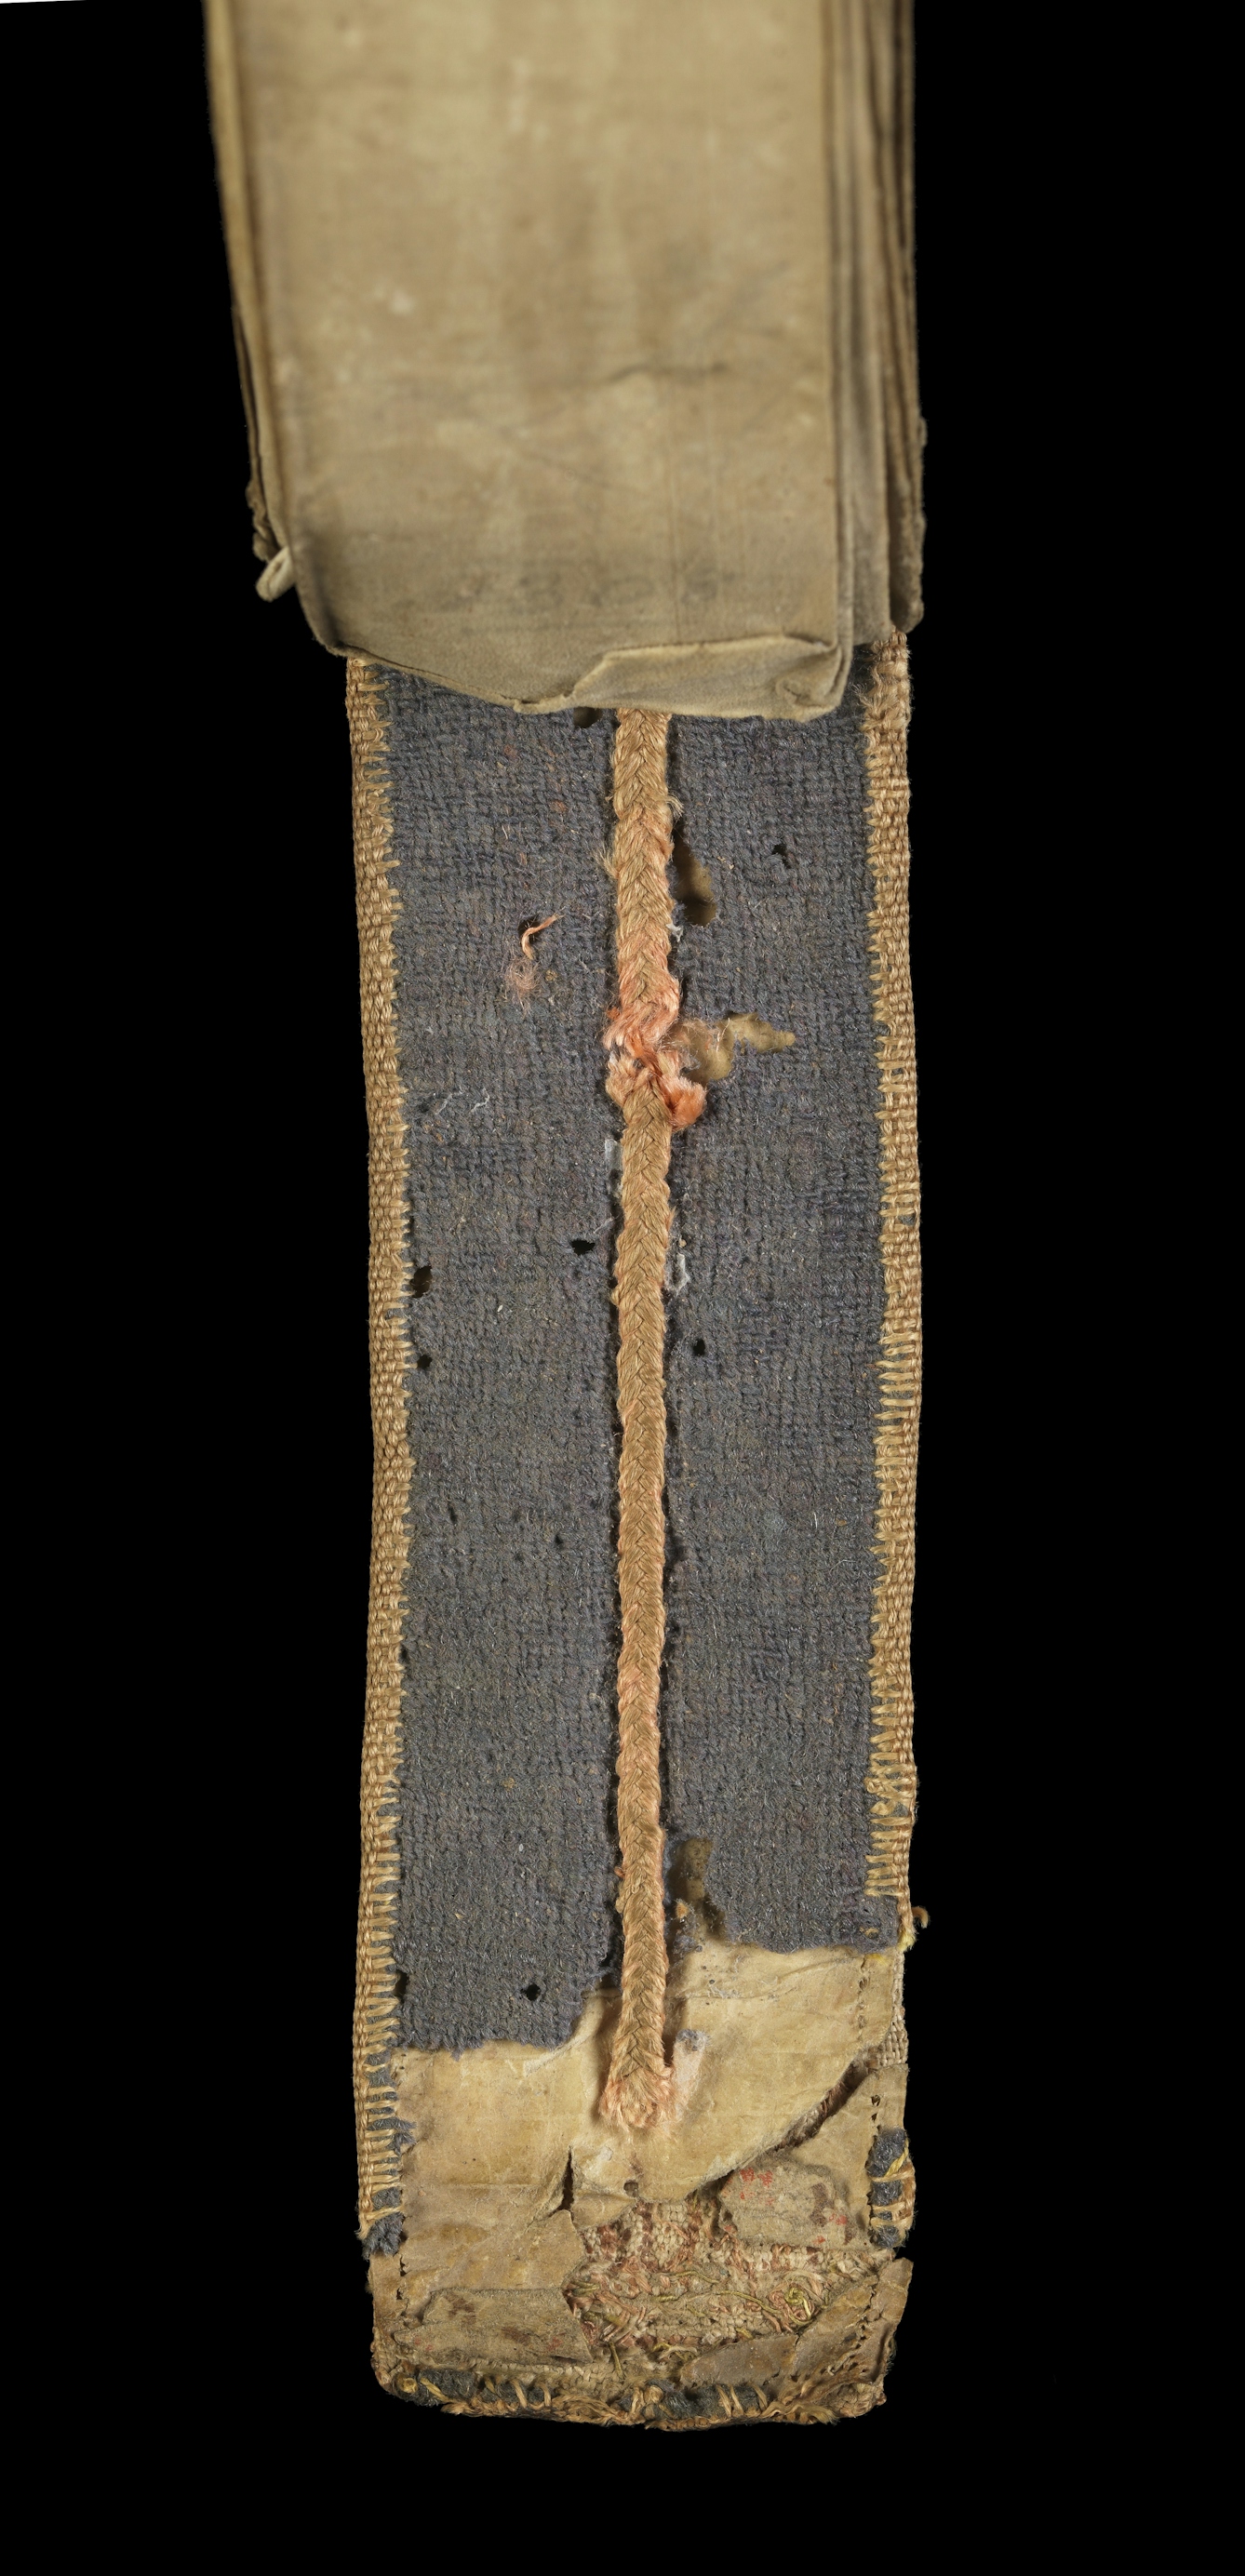 Photograph of a 15th century Medieval folding almanac. The embroidered binding is worn and there is an exposed layer of parchment below, with faint text lettering on it. 